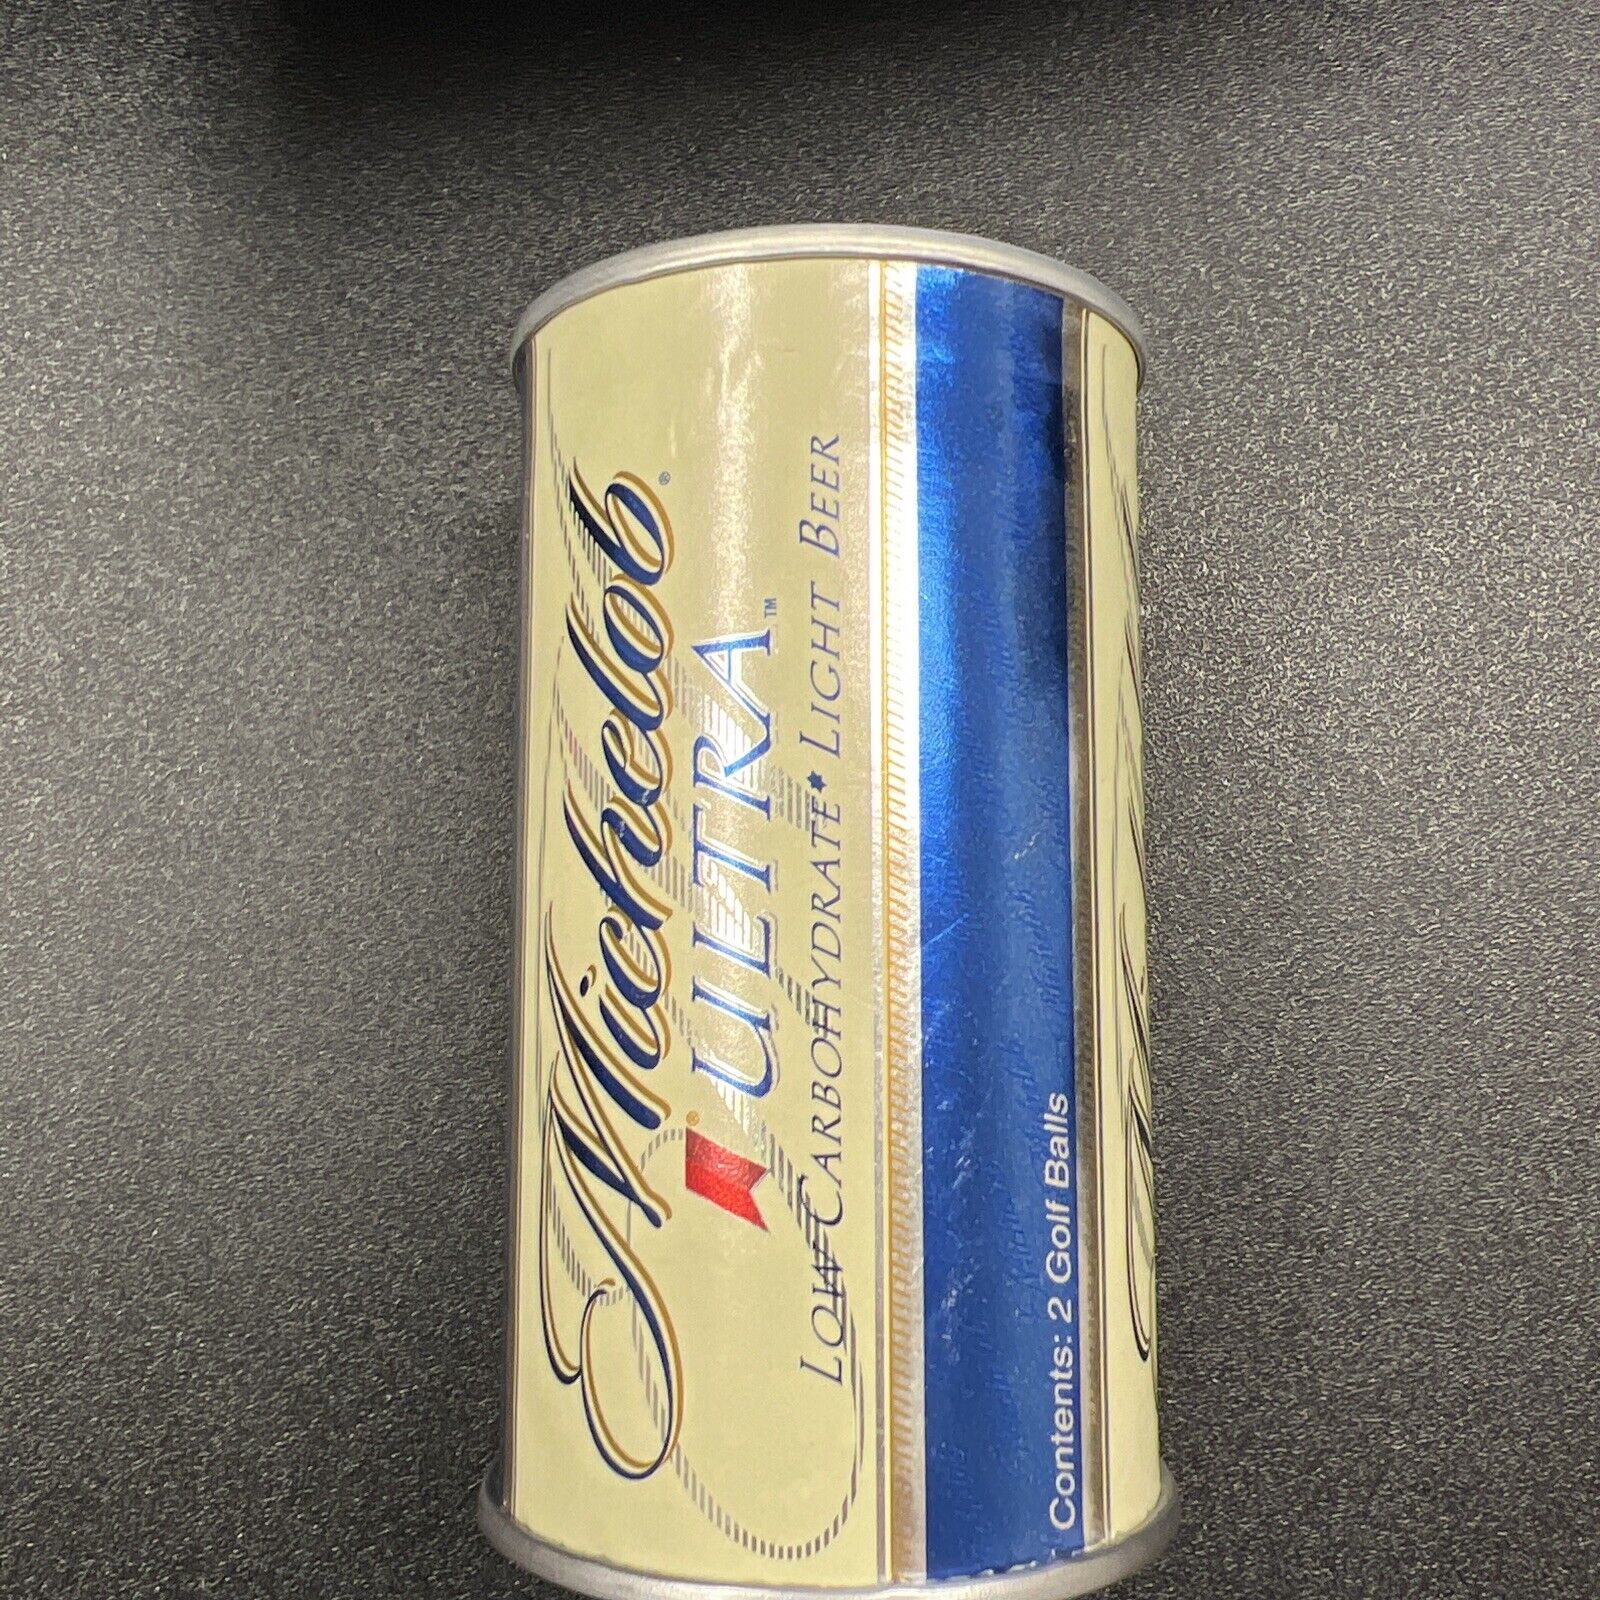 Vintage Michelob Ultra Golf Balls In Mini Can (5 Cans Available) - Unopened